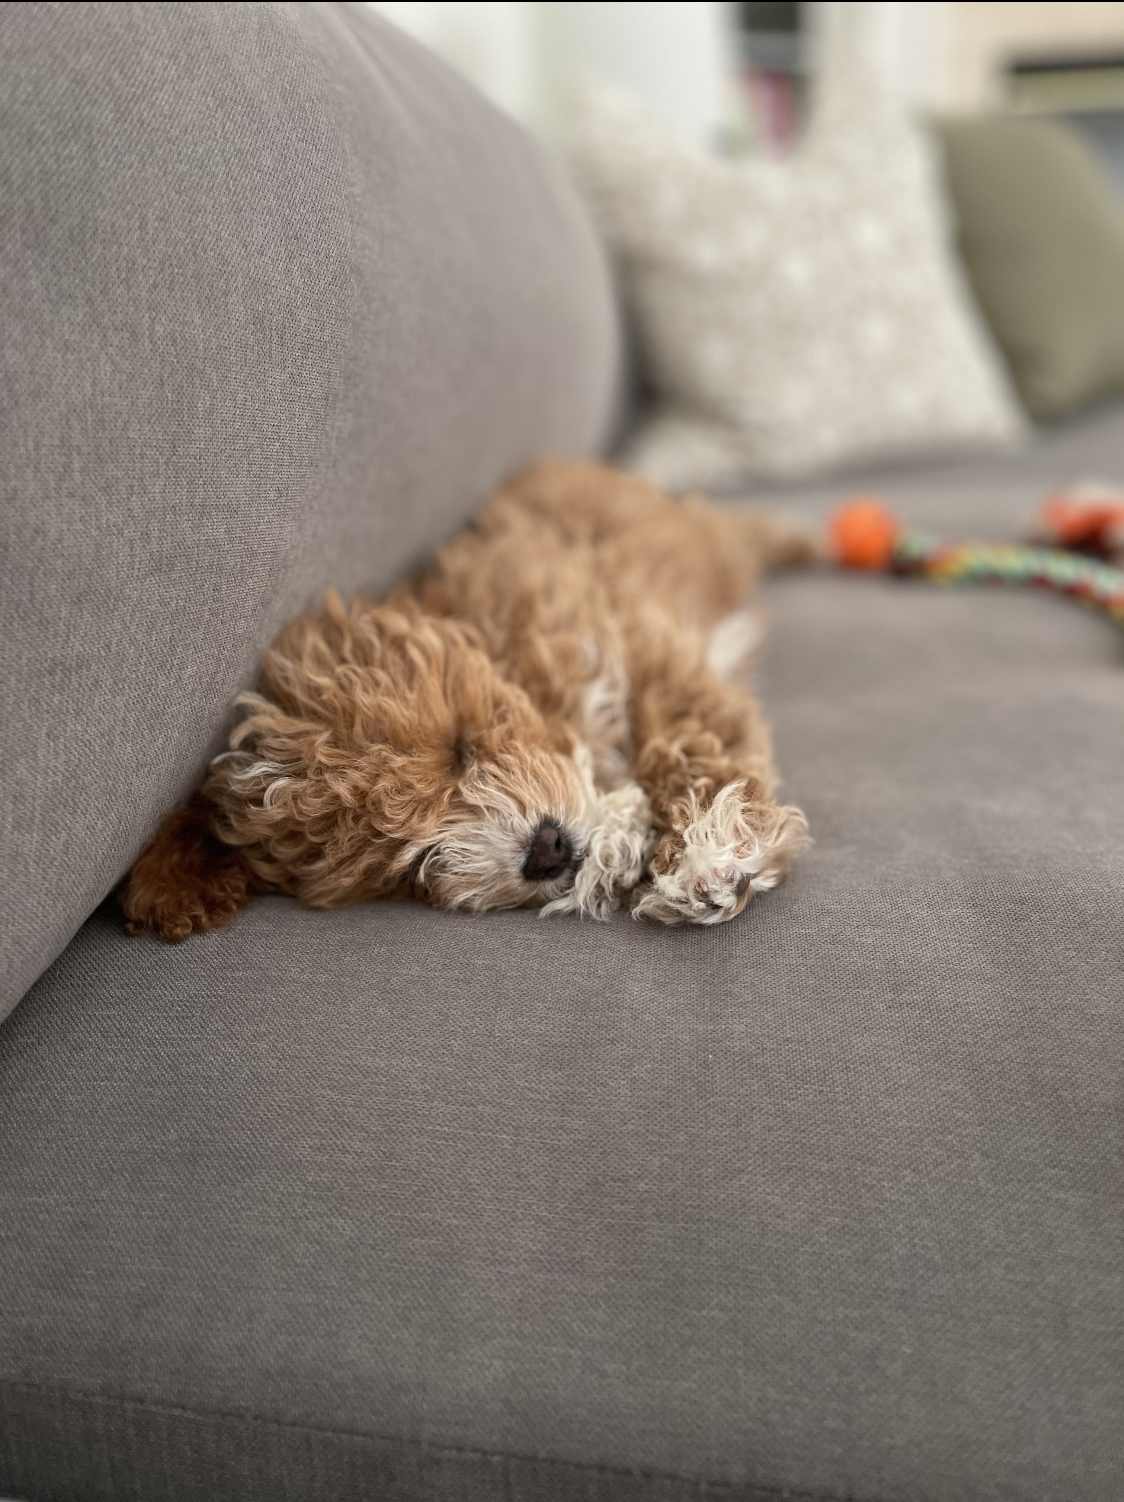 Cute doodle puppy sleeping on couch after playing with dog toys